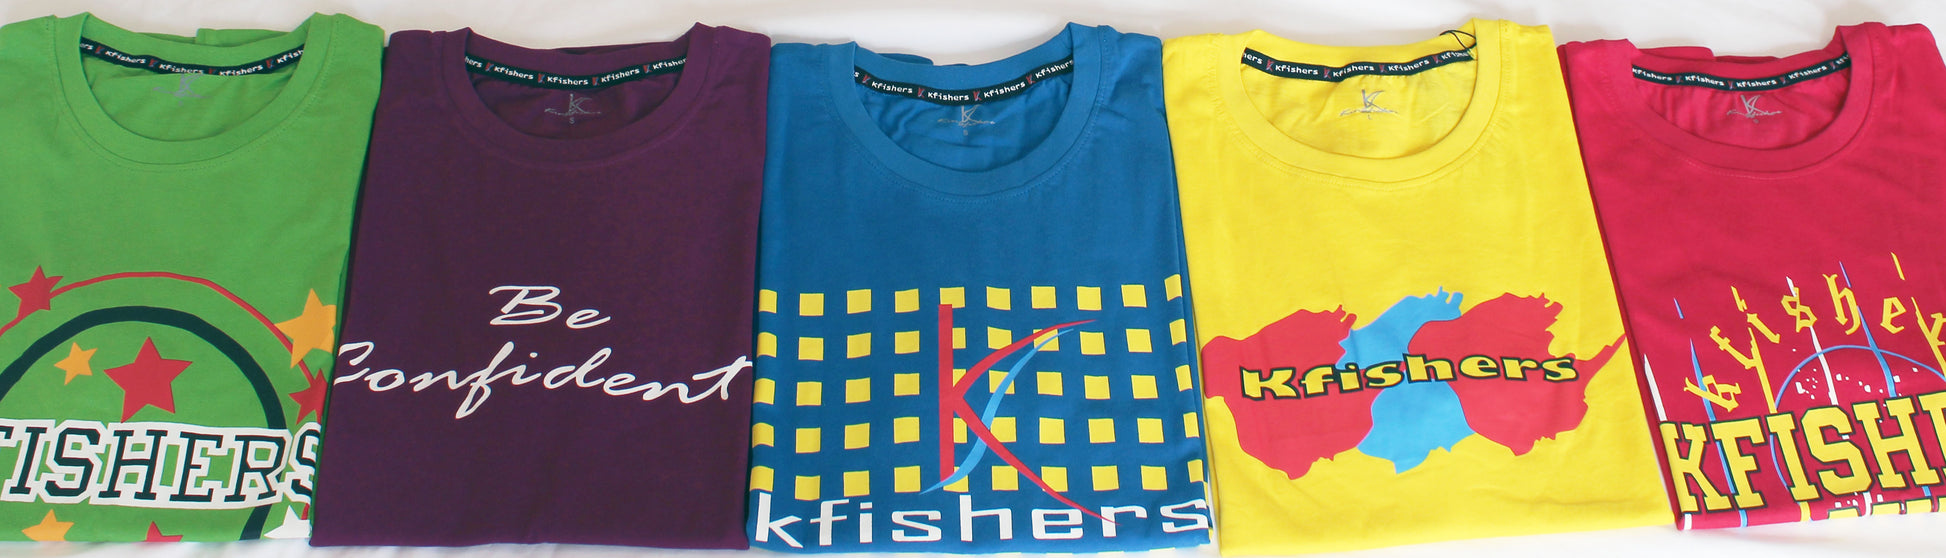 Kfishers Short Sleeve Mens Tshirt Yellow - Premium T-Shirt from KFISHERS - Just $8! Shop now at KFISHERS